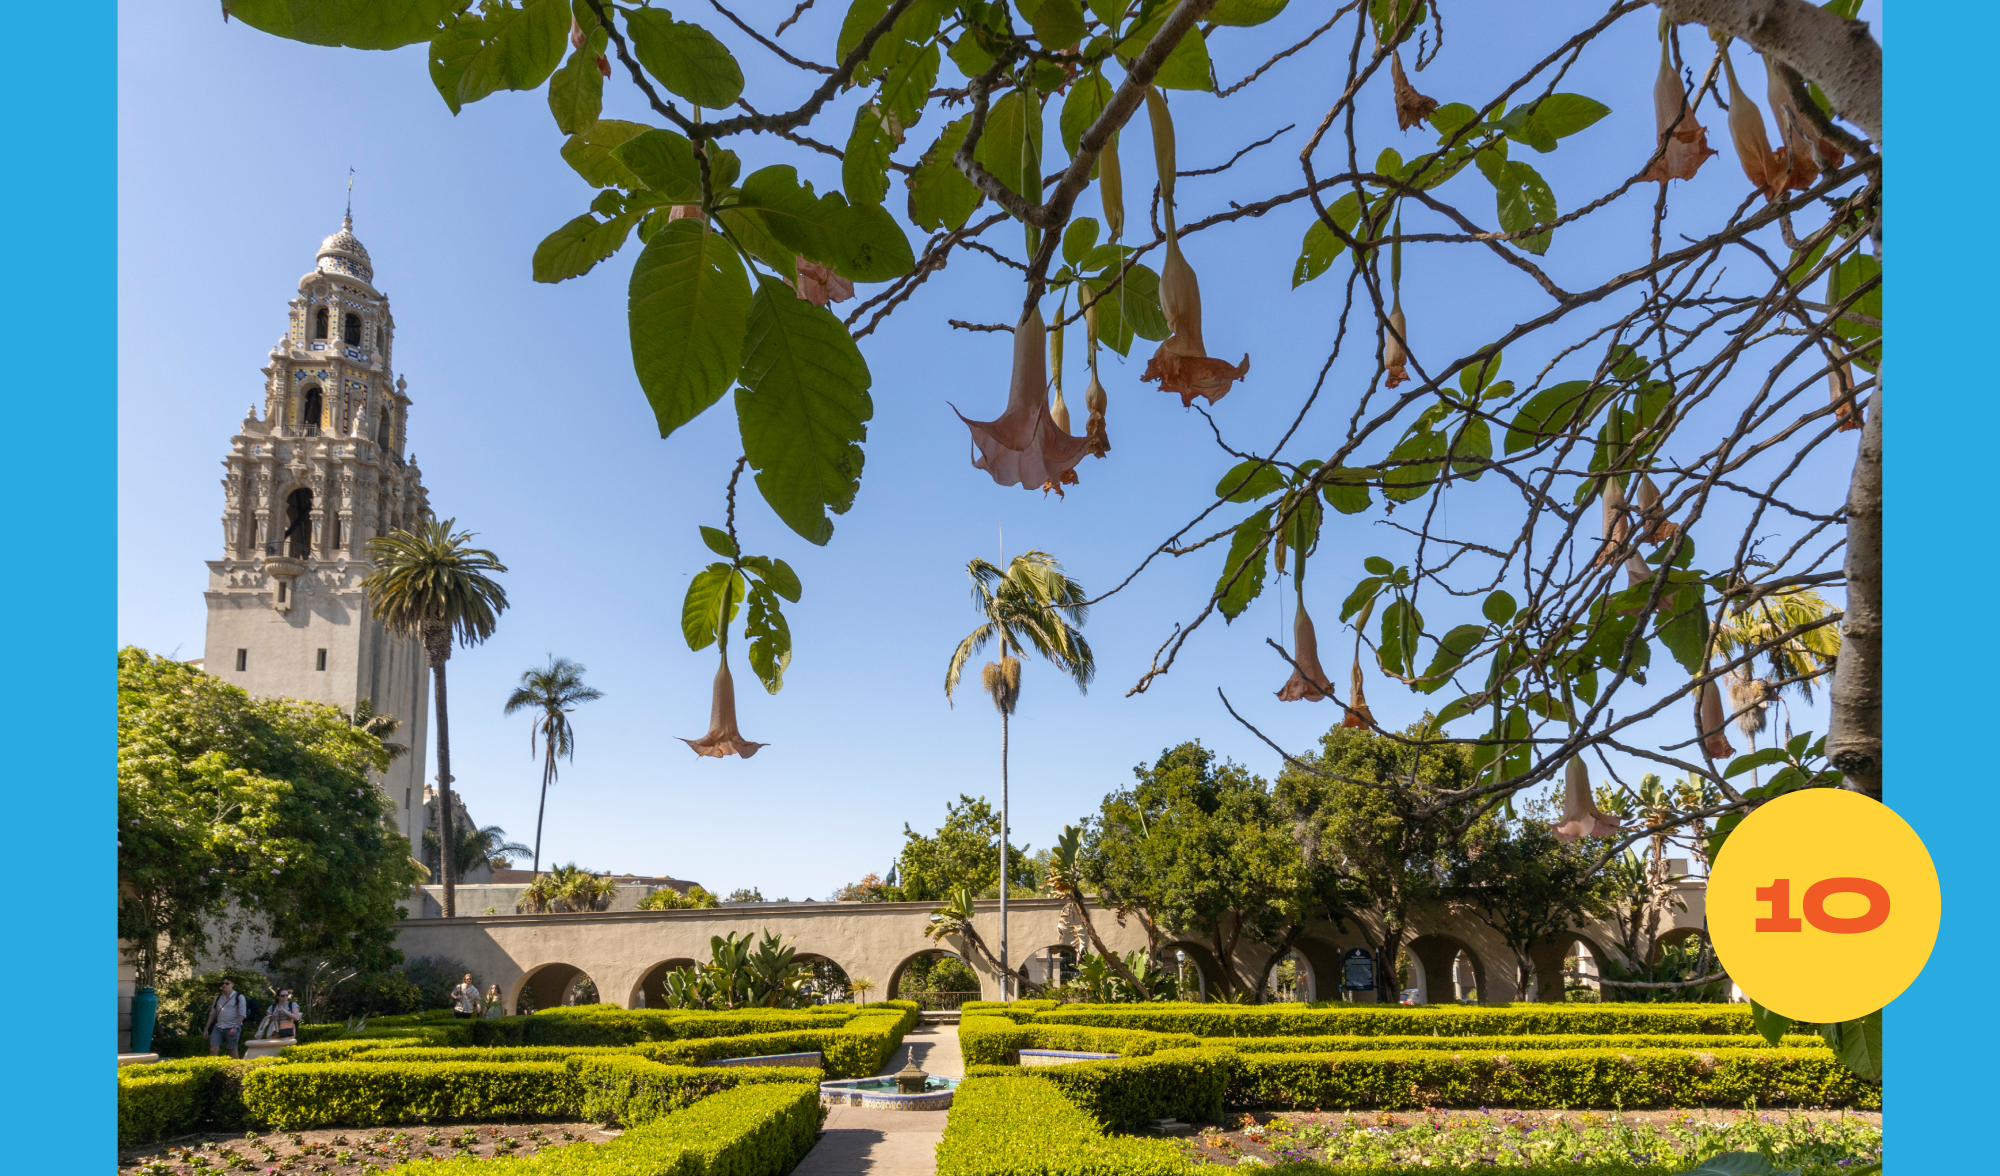 Blooming Angel Trumpet flowers in the foreground at Balboa Park Botanical Building, the California Tower in the background